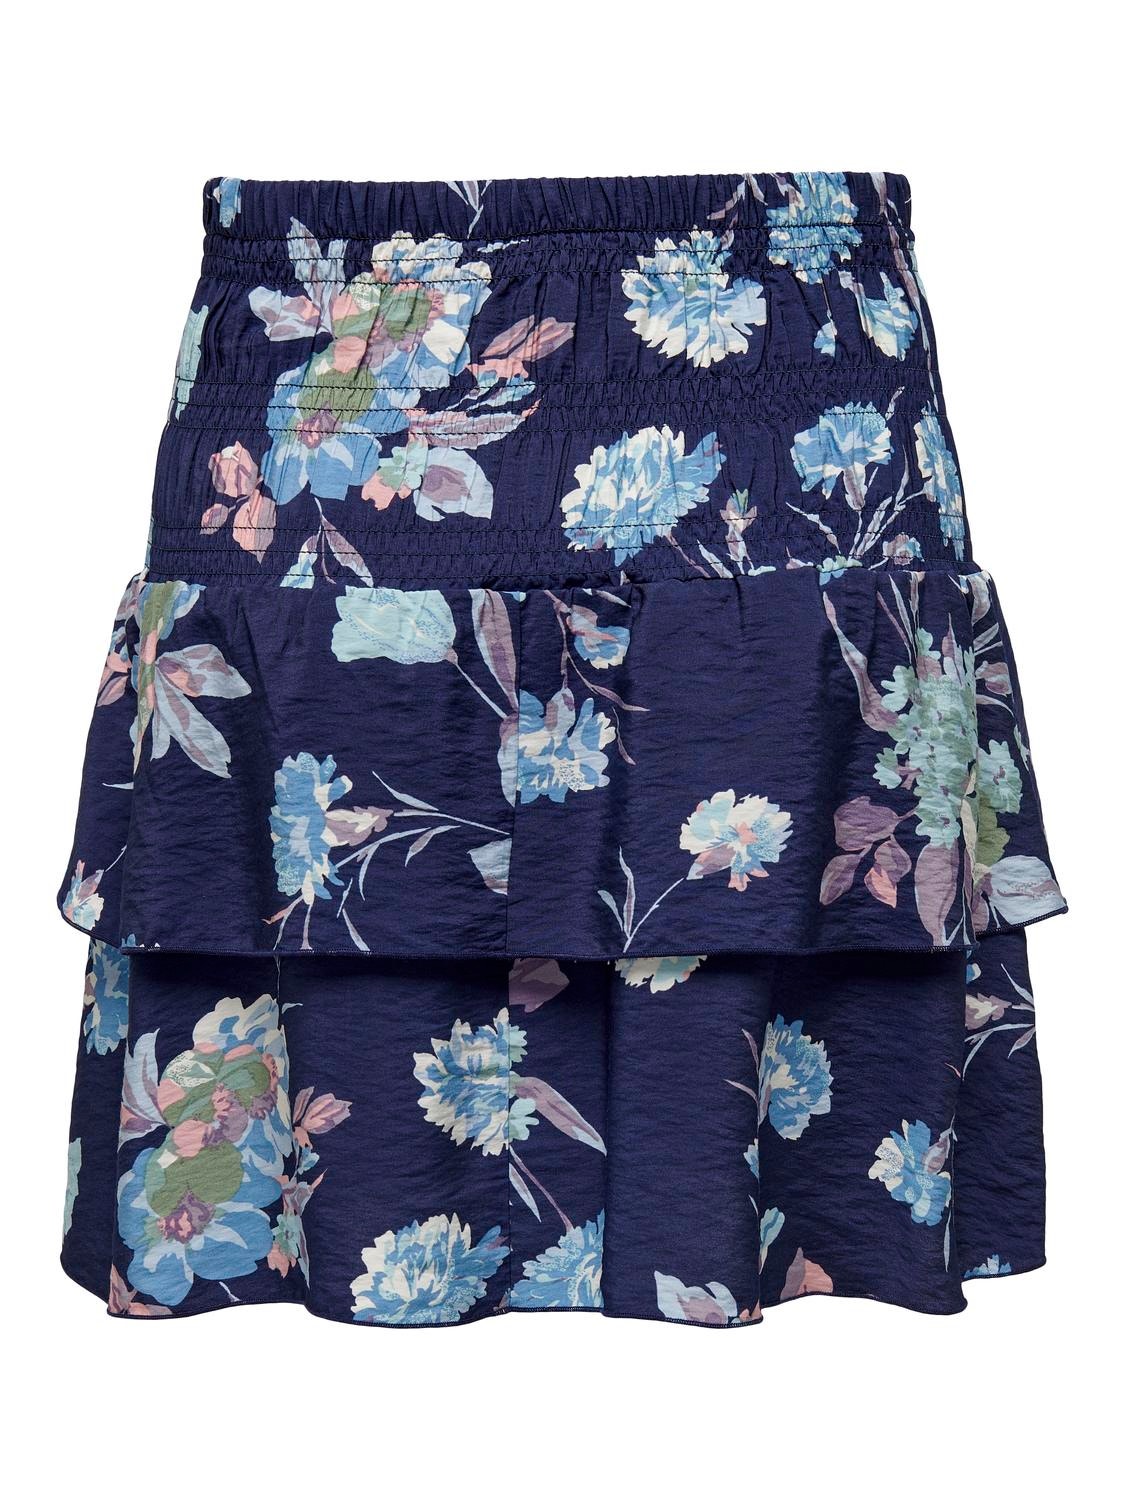 ONLY Short Skirt With Smock -Patriot Blue - 15291664